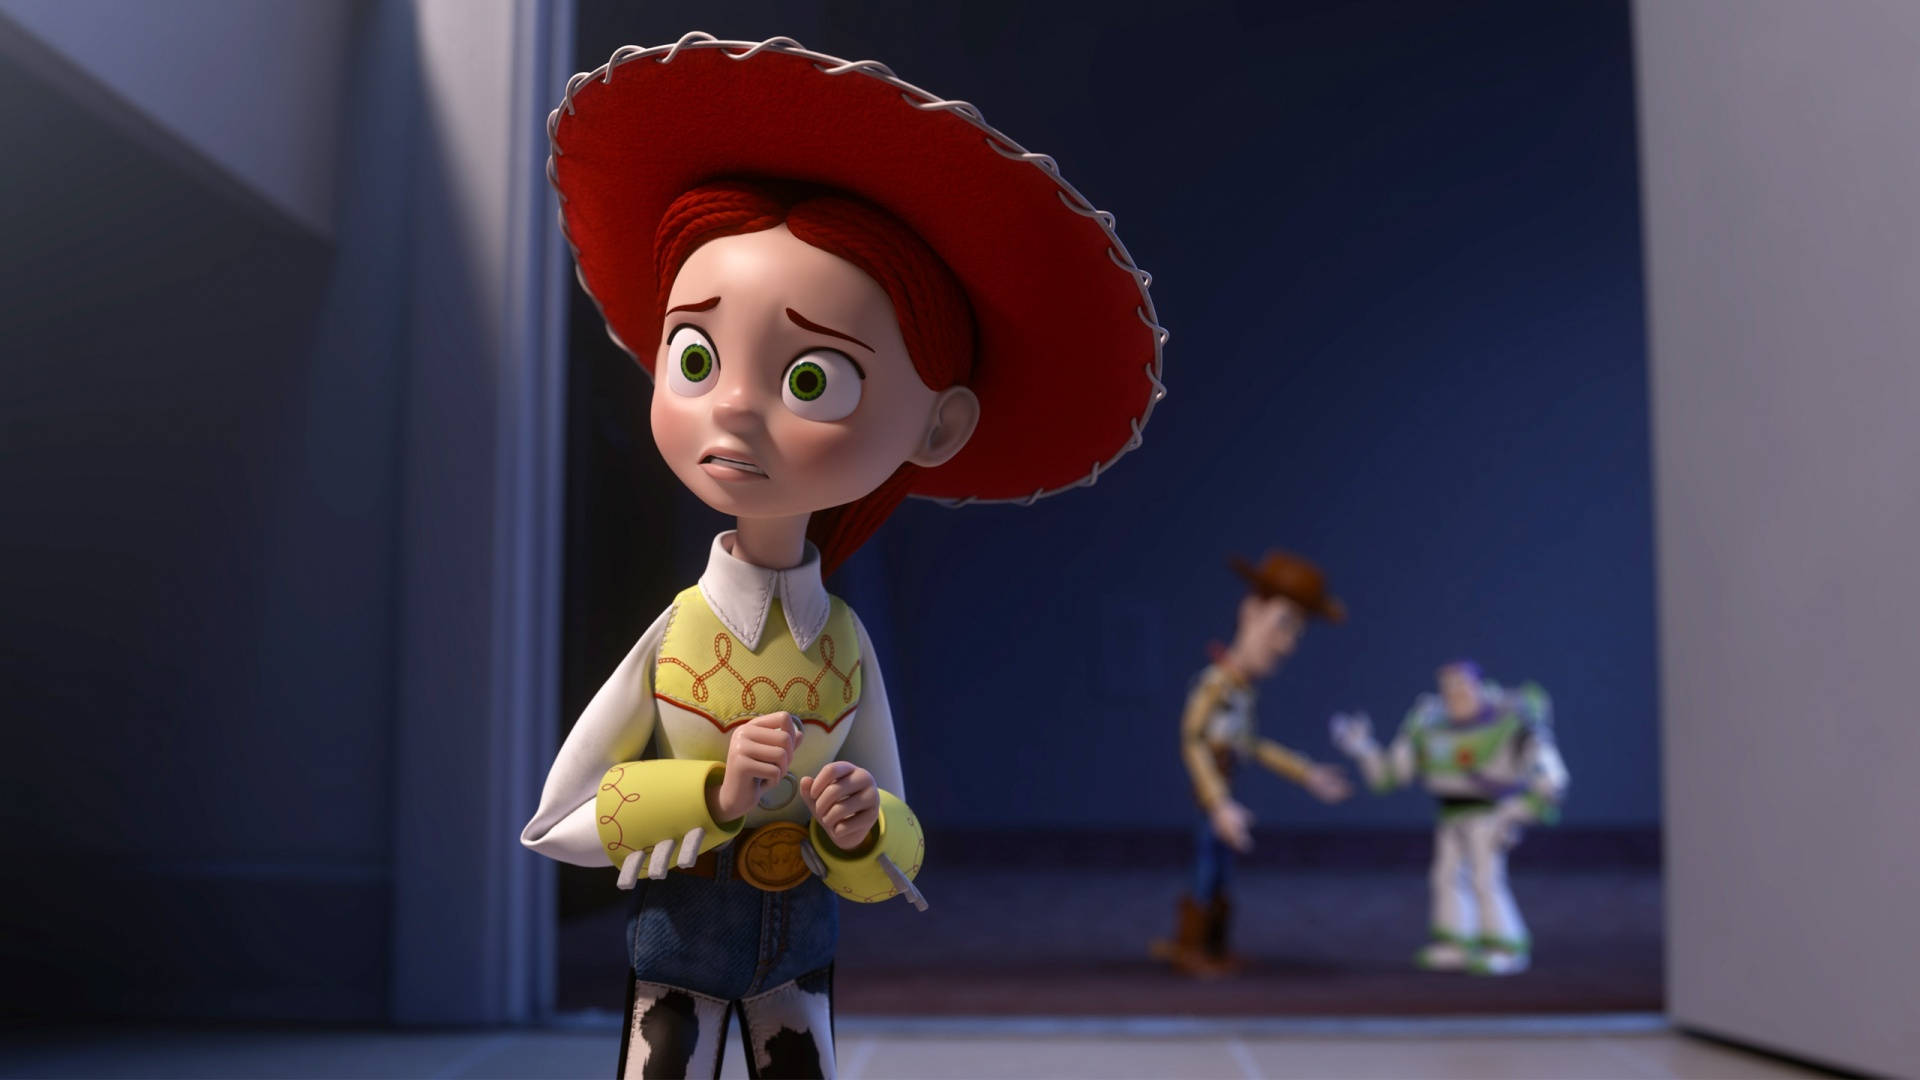 toy story 2 characters jessie